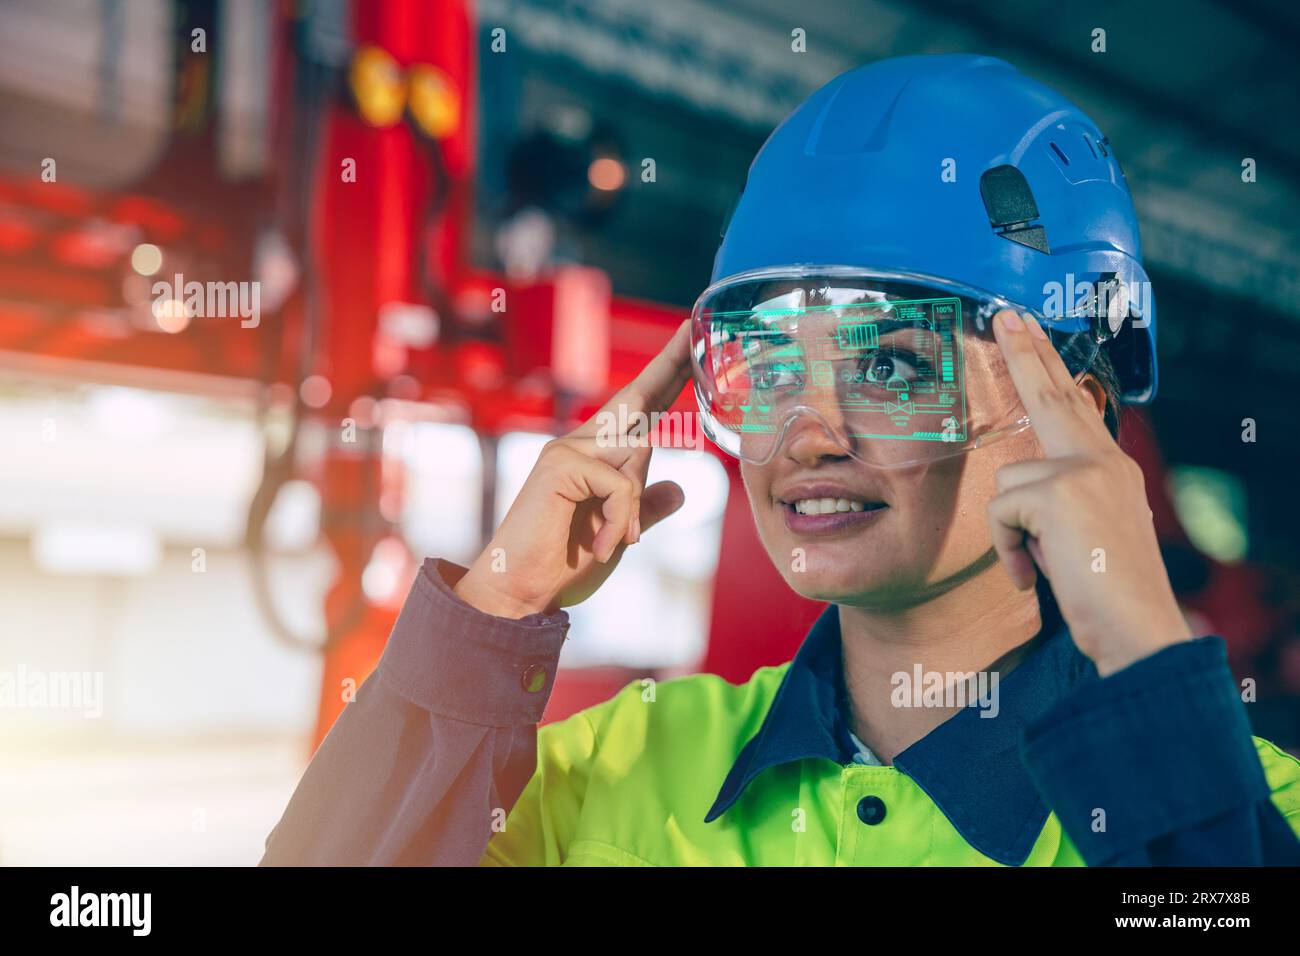 Engineer women using visual VR glasses innovation in advance engineering technology industry working support device Stock Photo